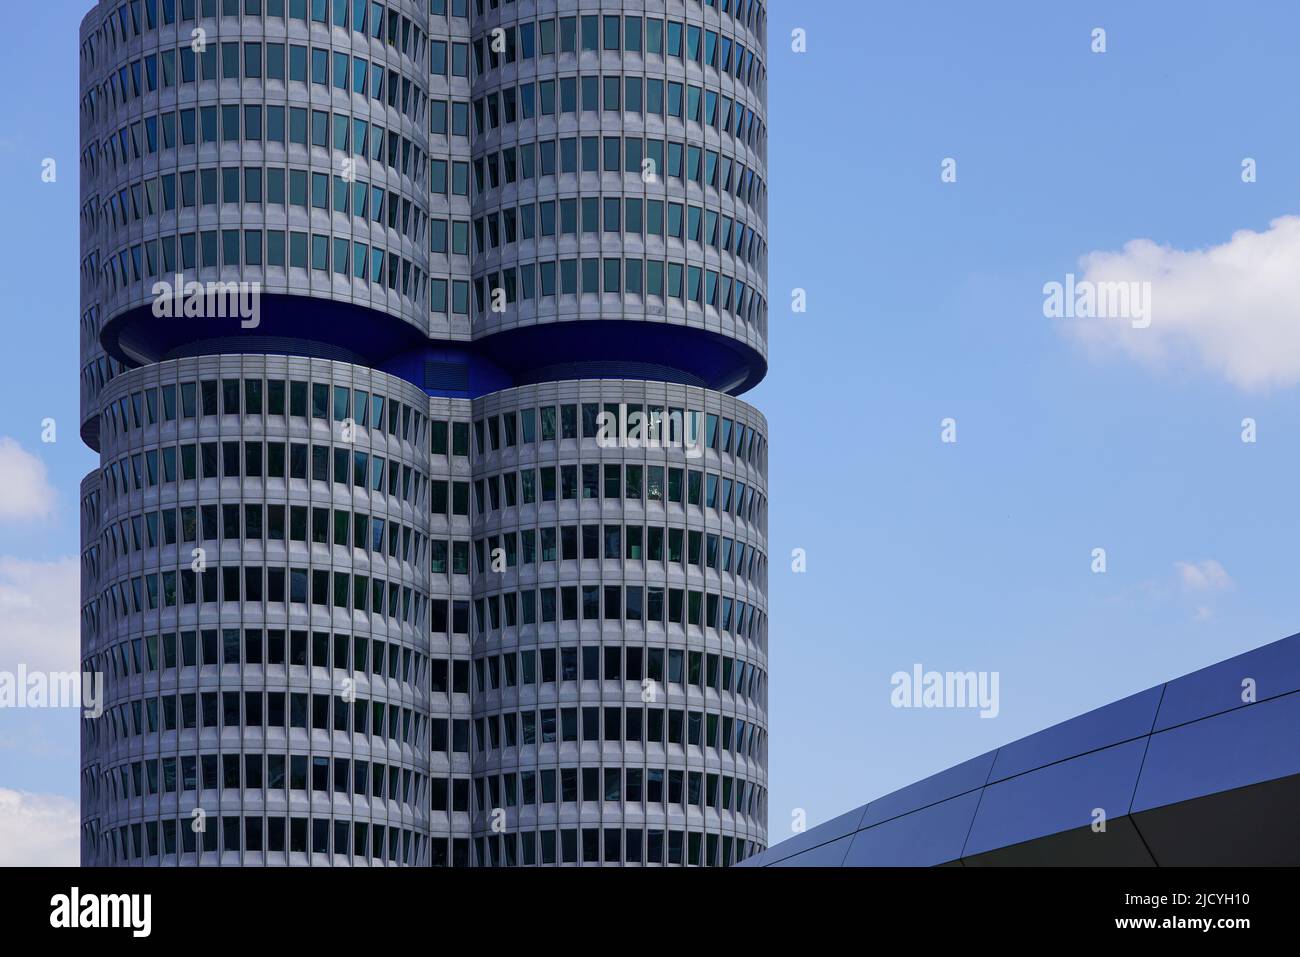 The BMW Tower, the BMW four-cylinder is the main administration building and landmark of the car manufacturer BMW in Munich, Germany, 9.5.22 Stock Photo